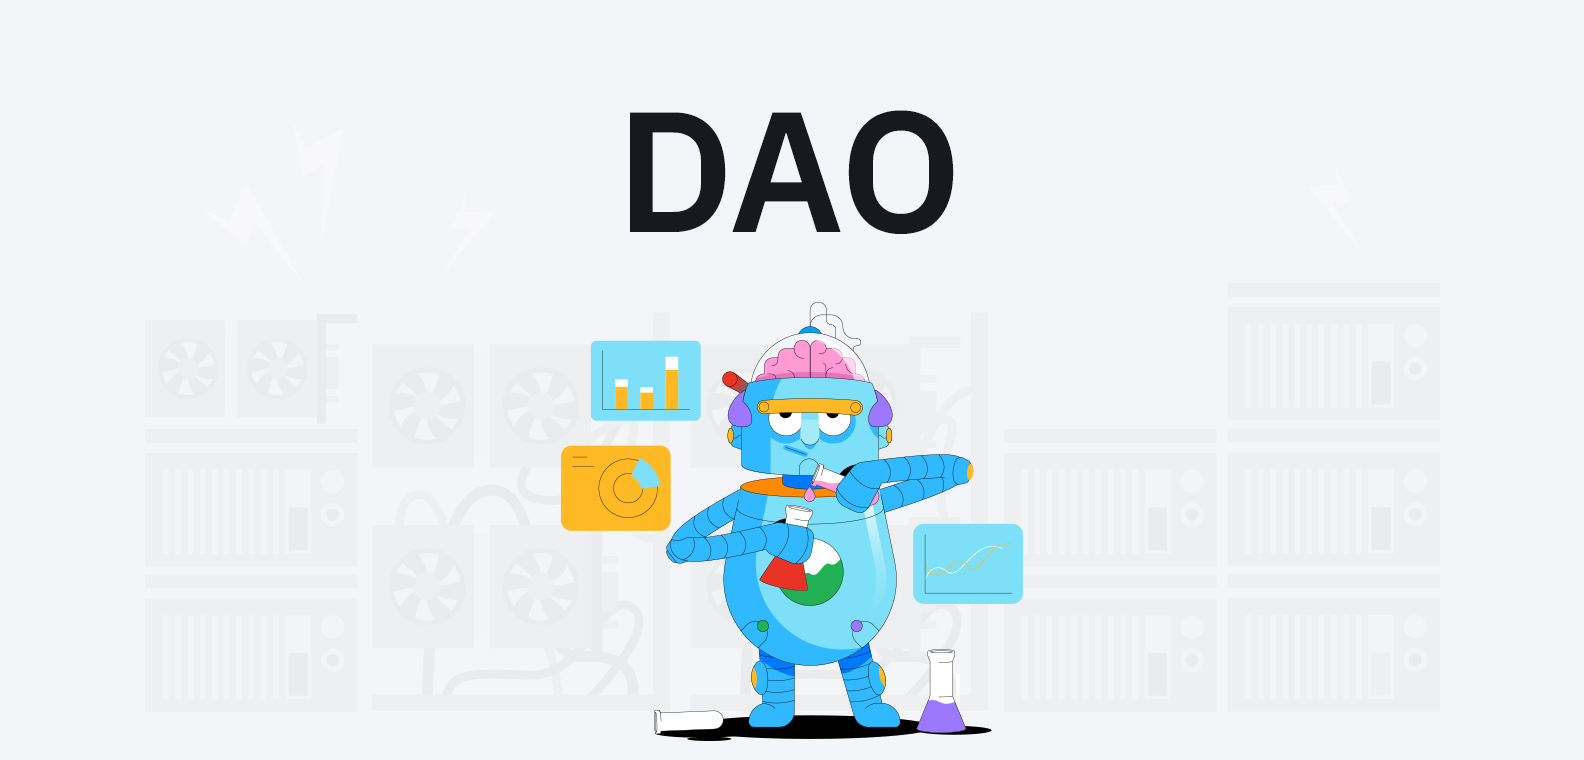 DAO Meaning